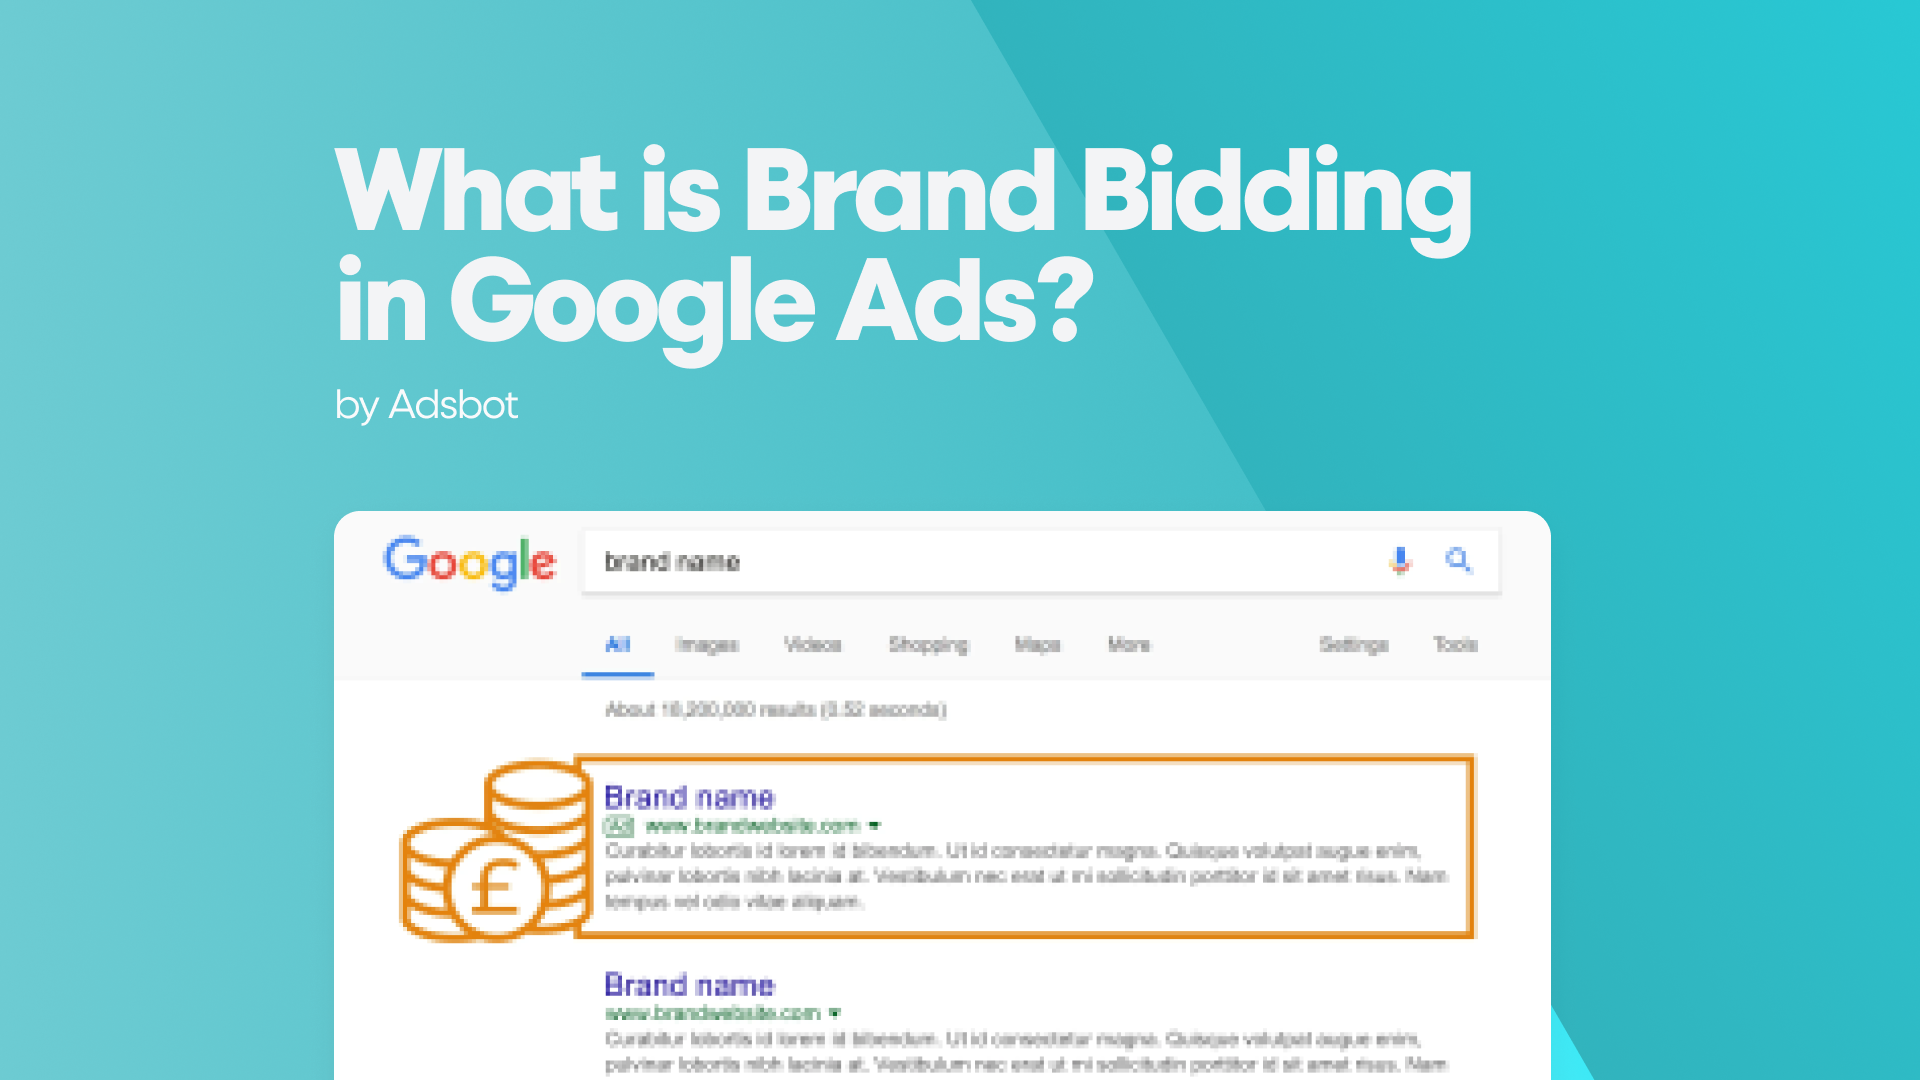 What is Brand Bidding in Google Ads?